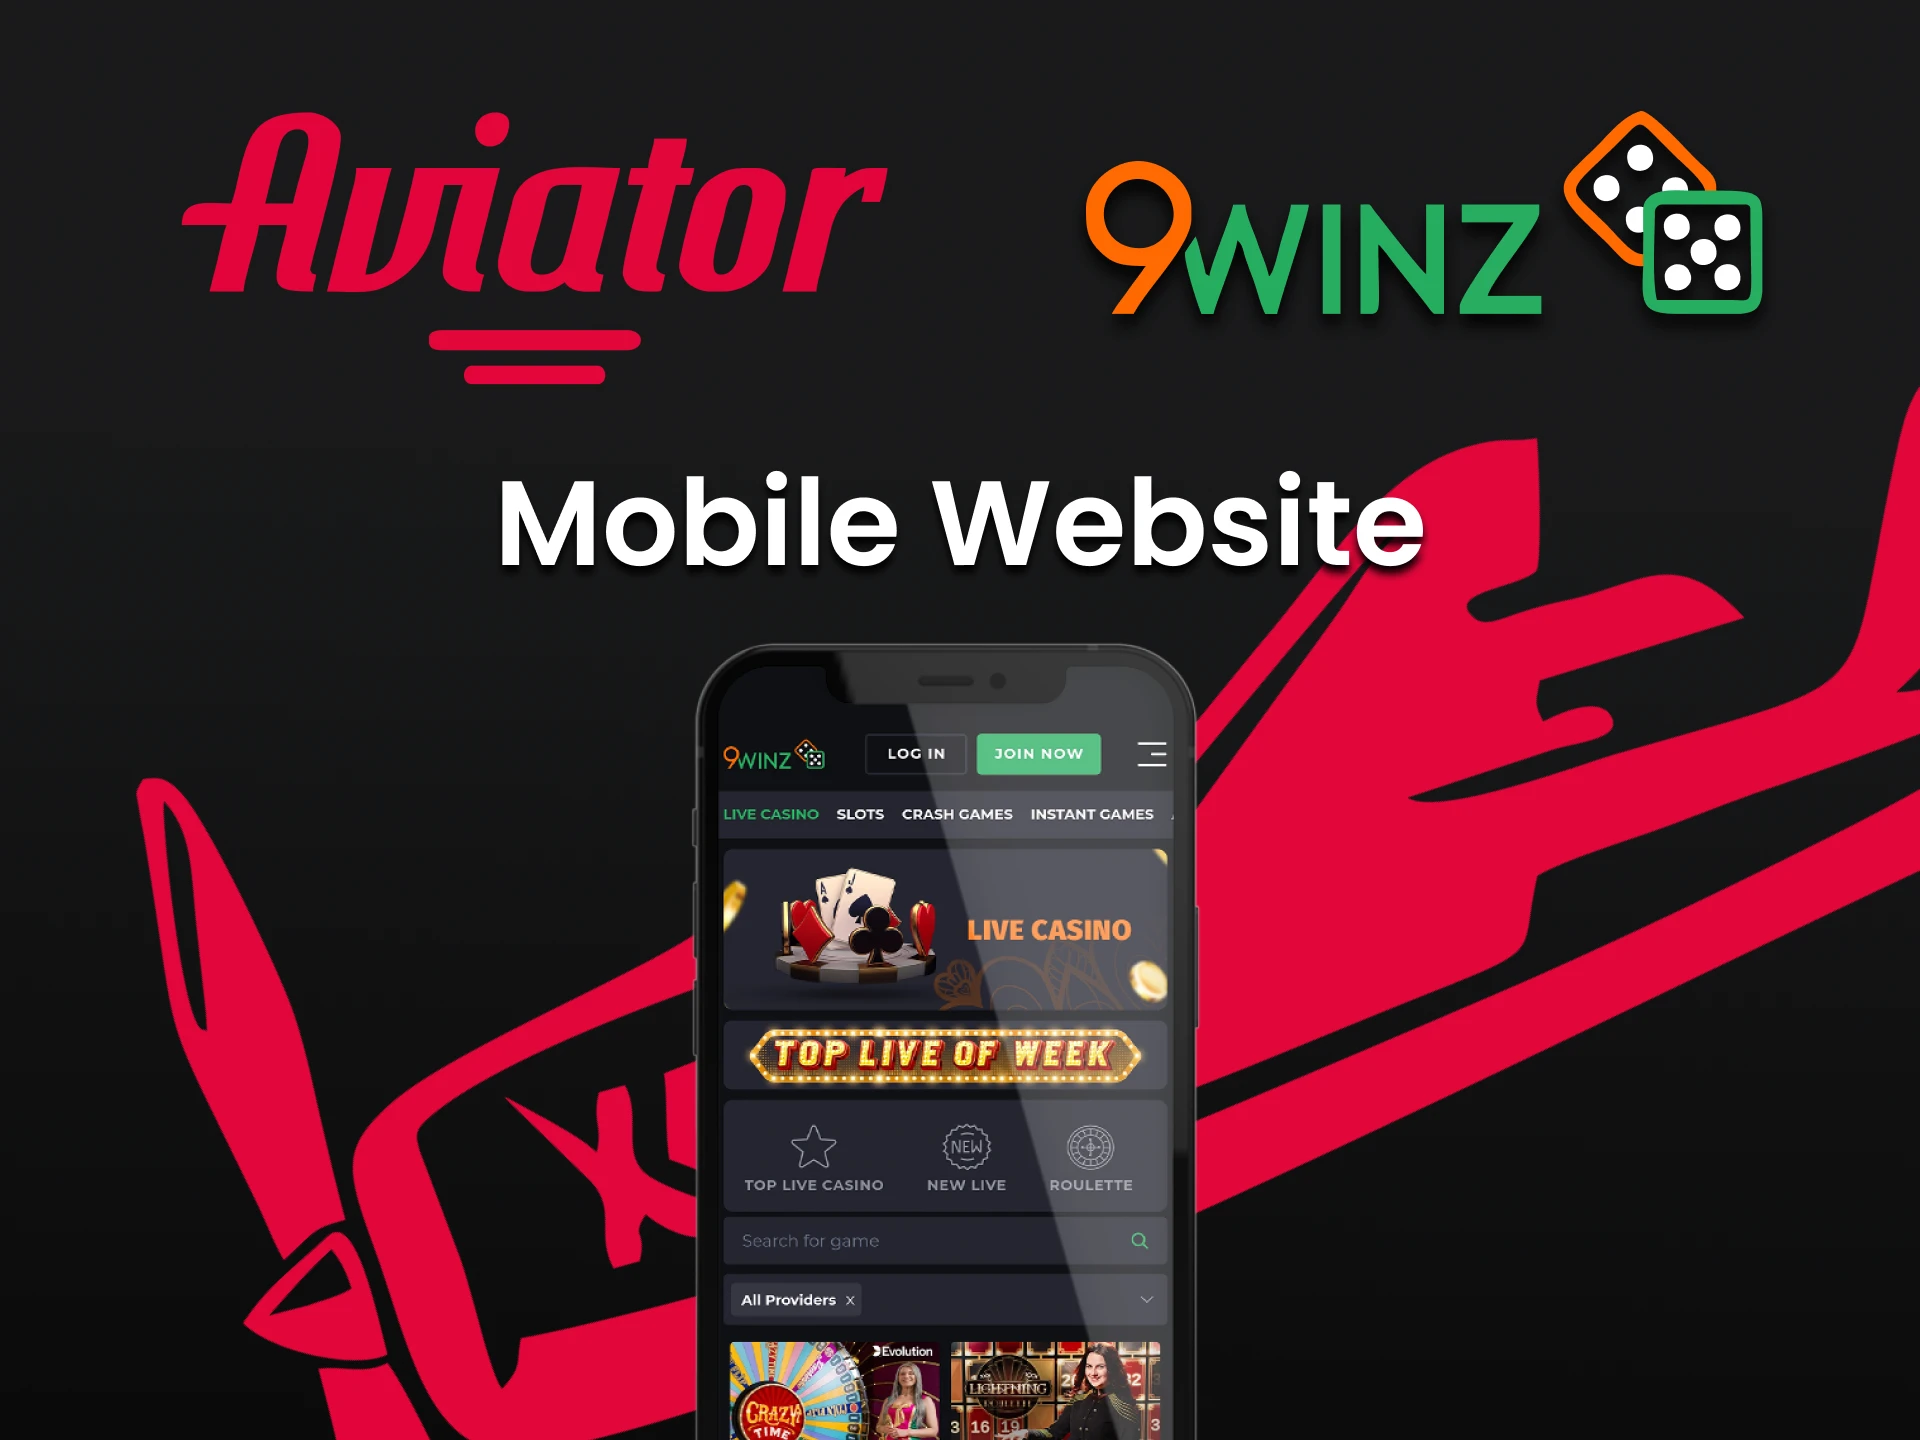 Use 9winz mobile version to play Aviator.